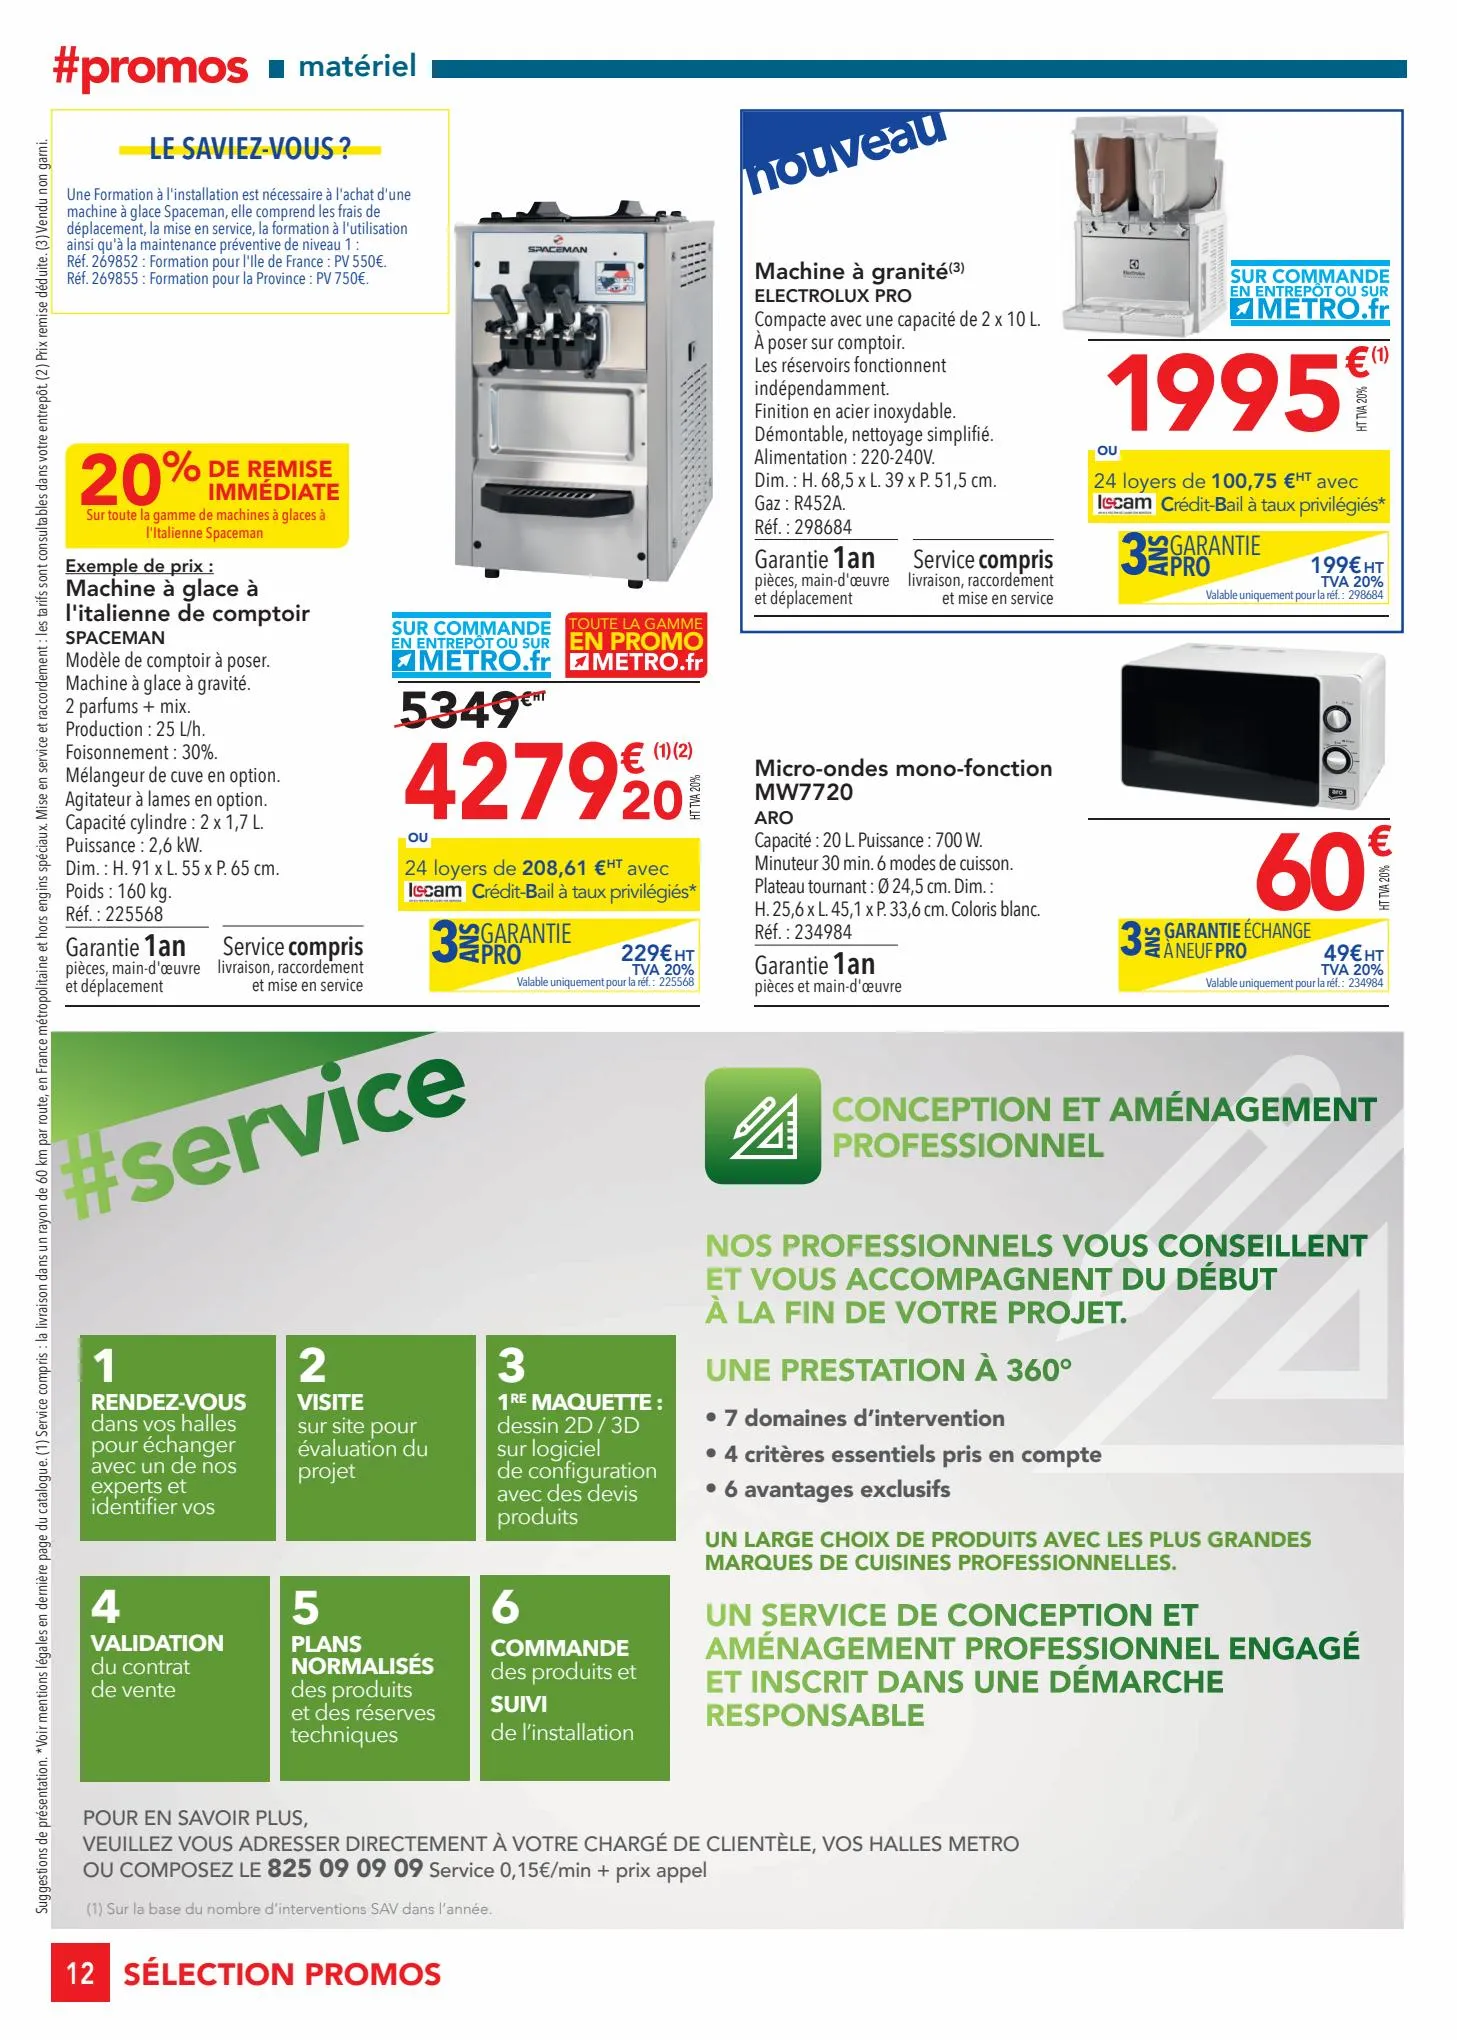 Catalogue Selection Promos Equipement, page 00012